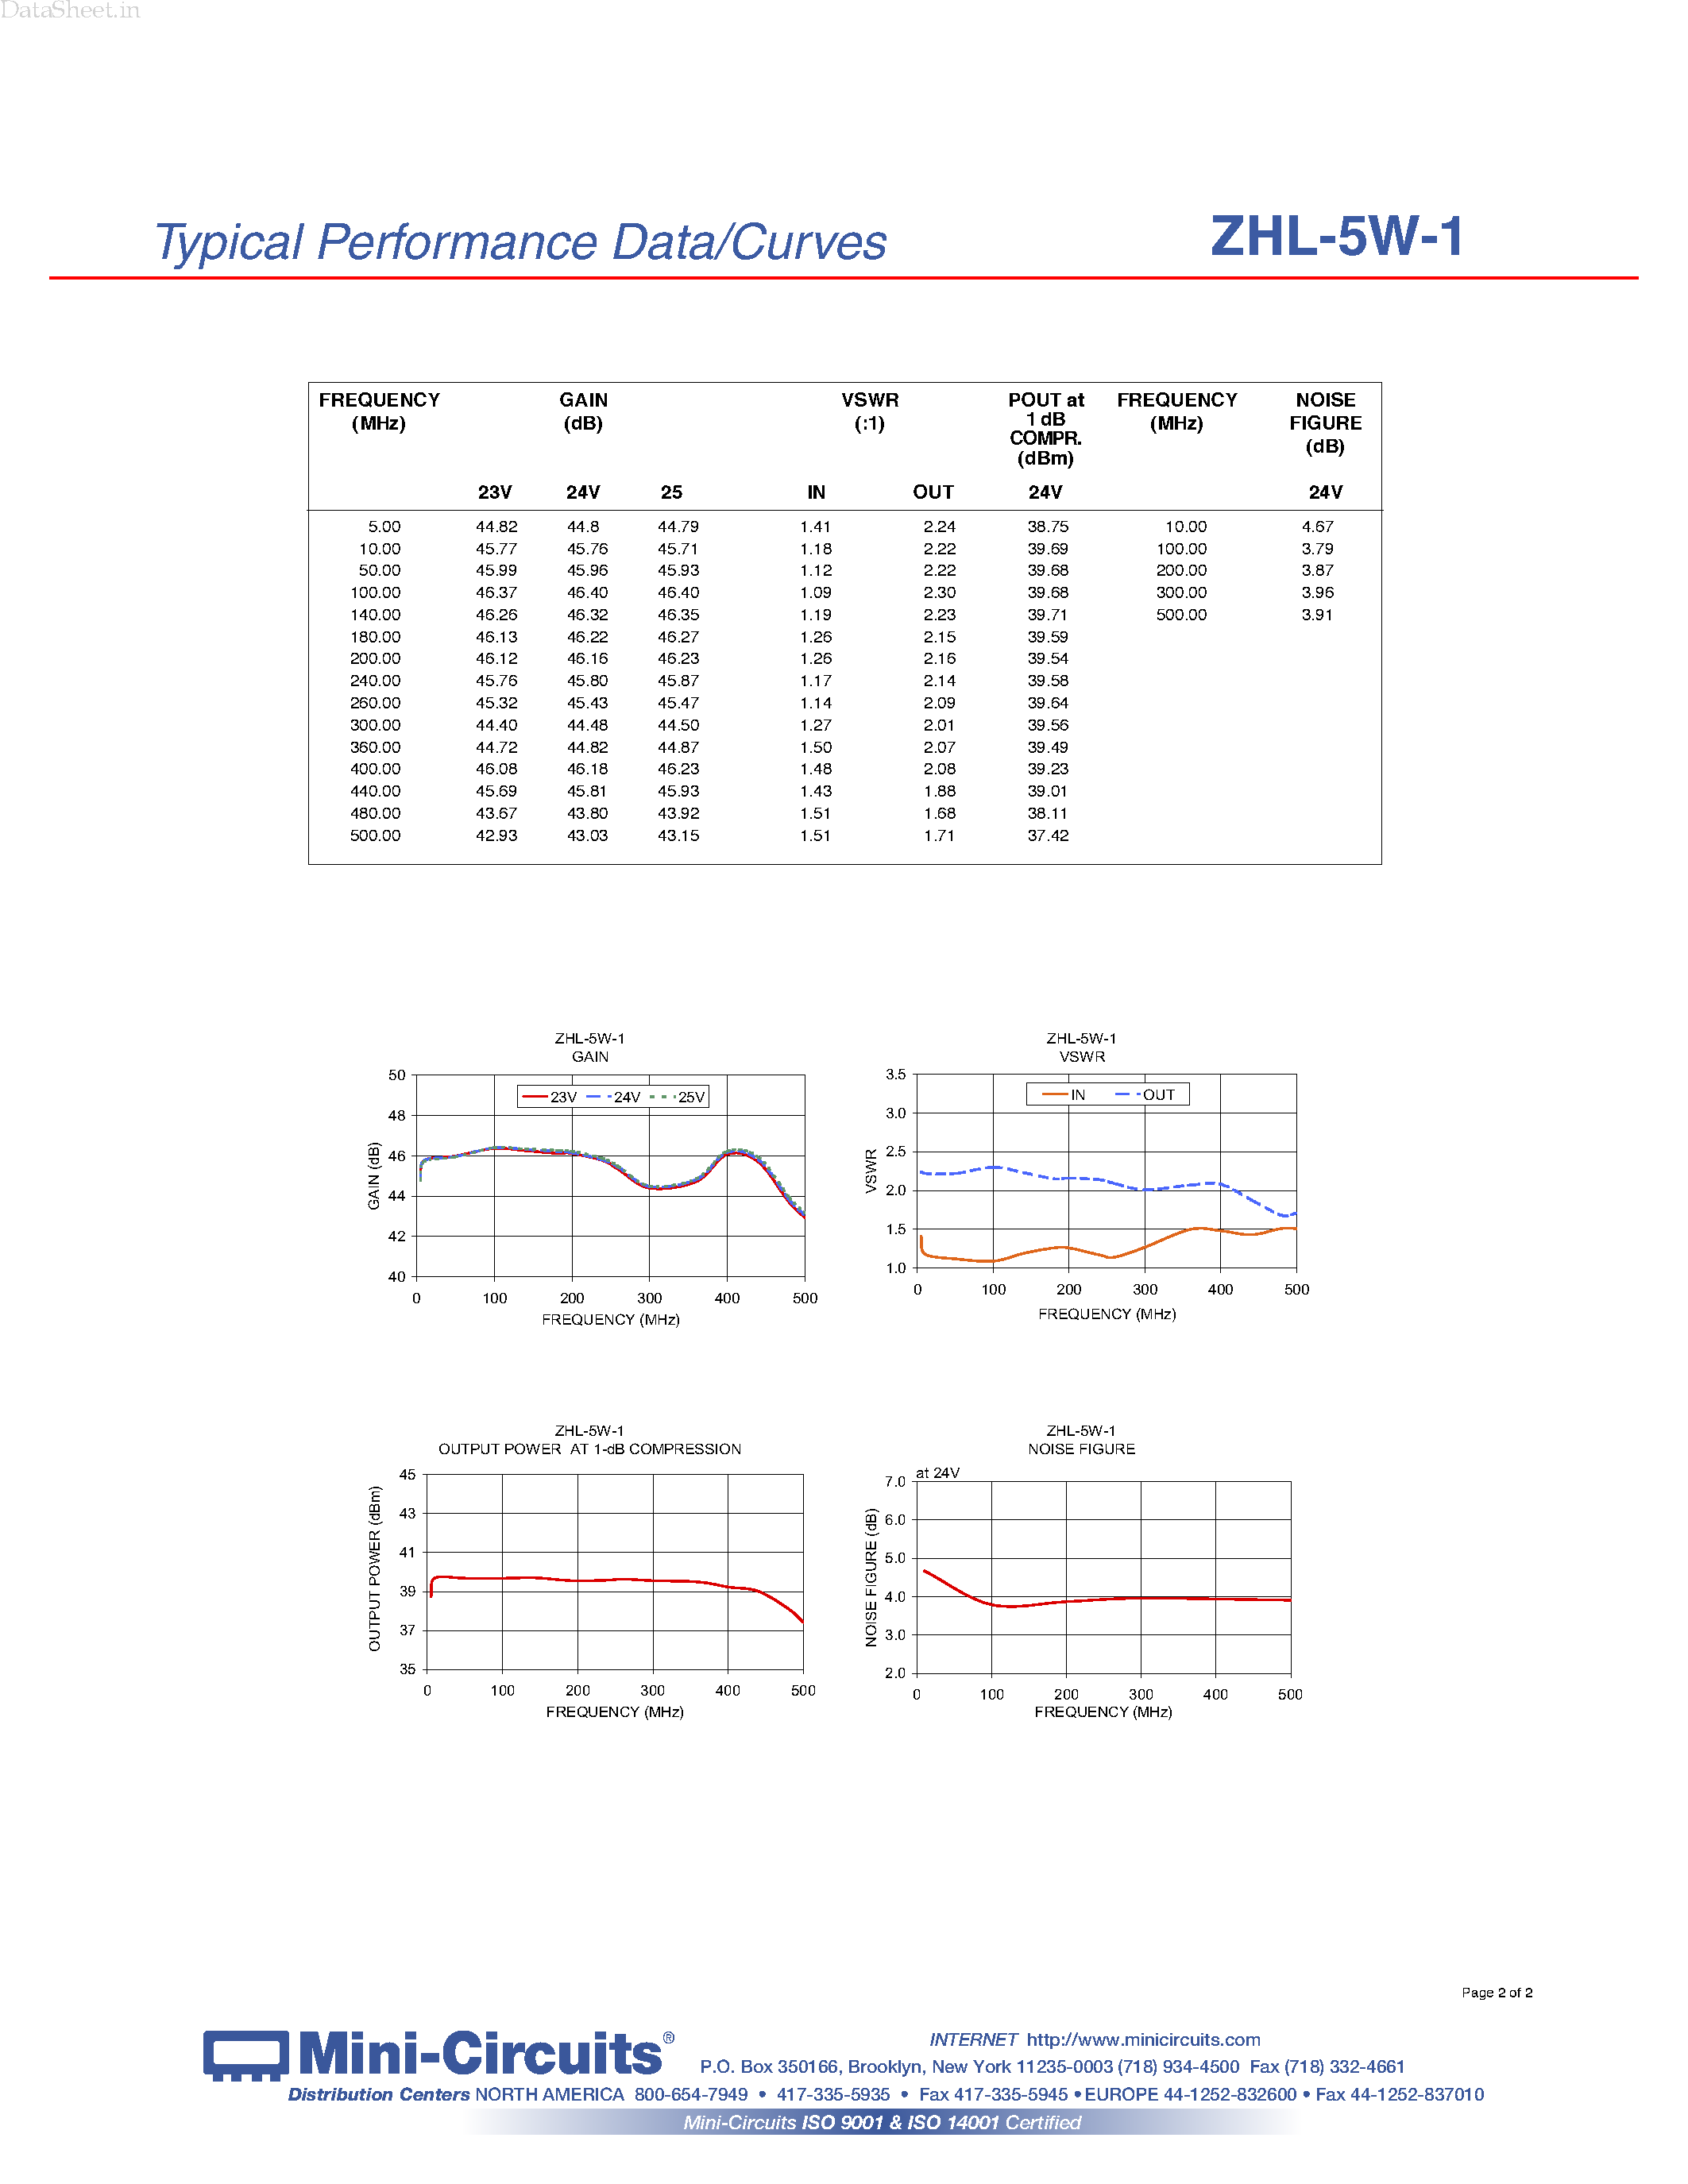 Datasheet ZHL-5W-1 - High Power 5 to 500 MHz page 2